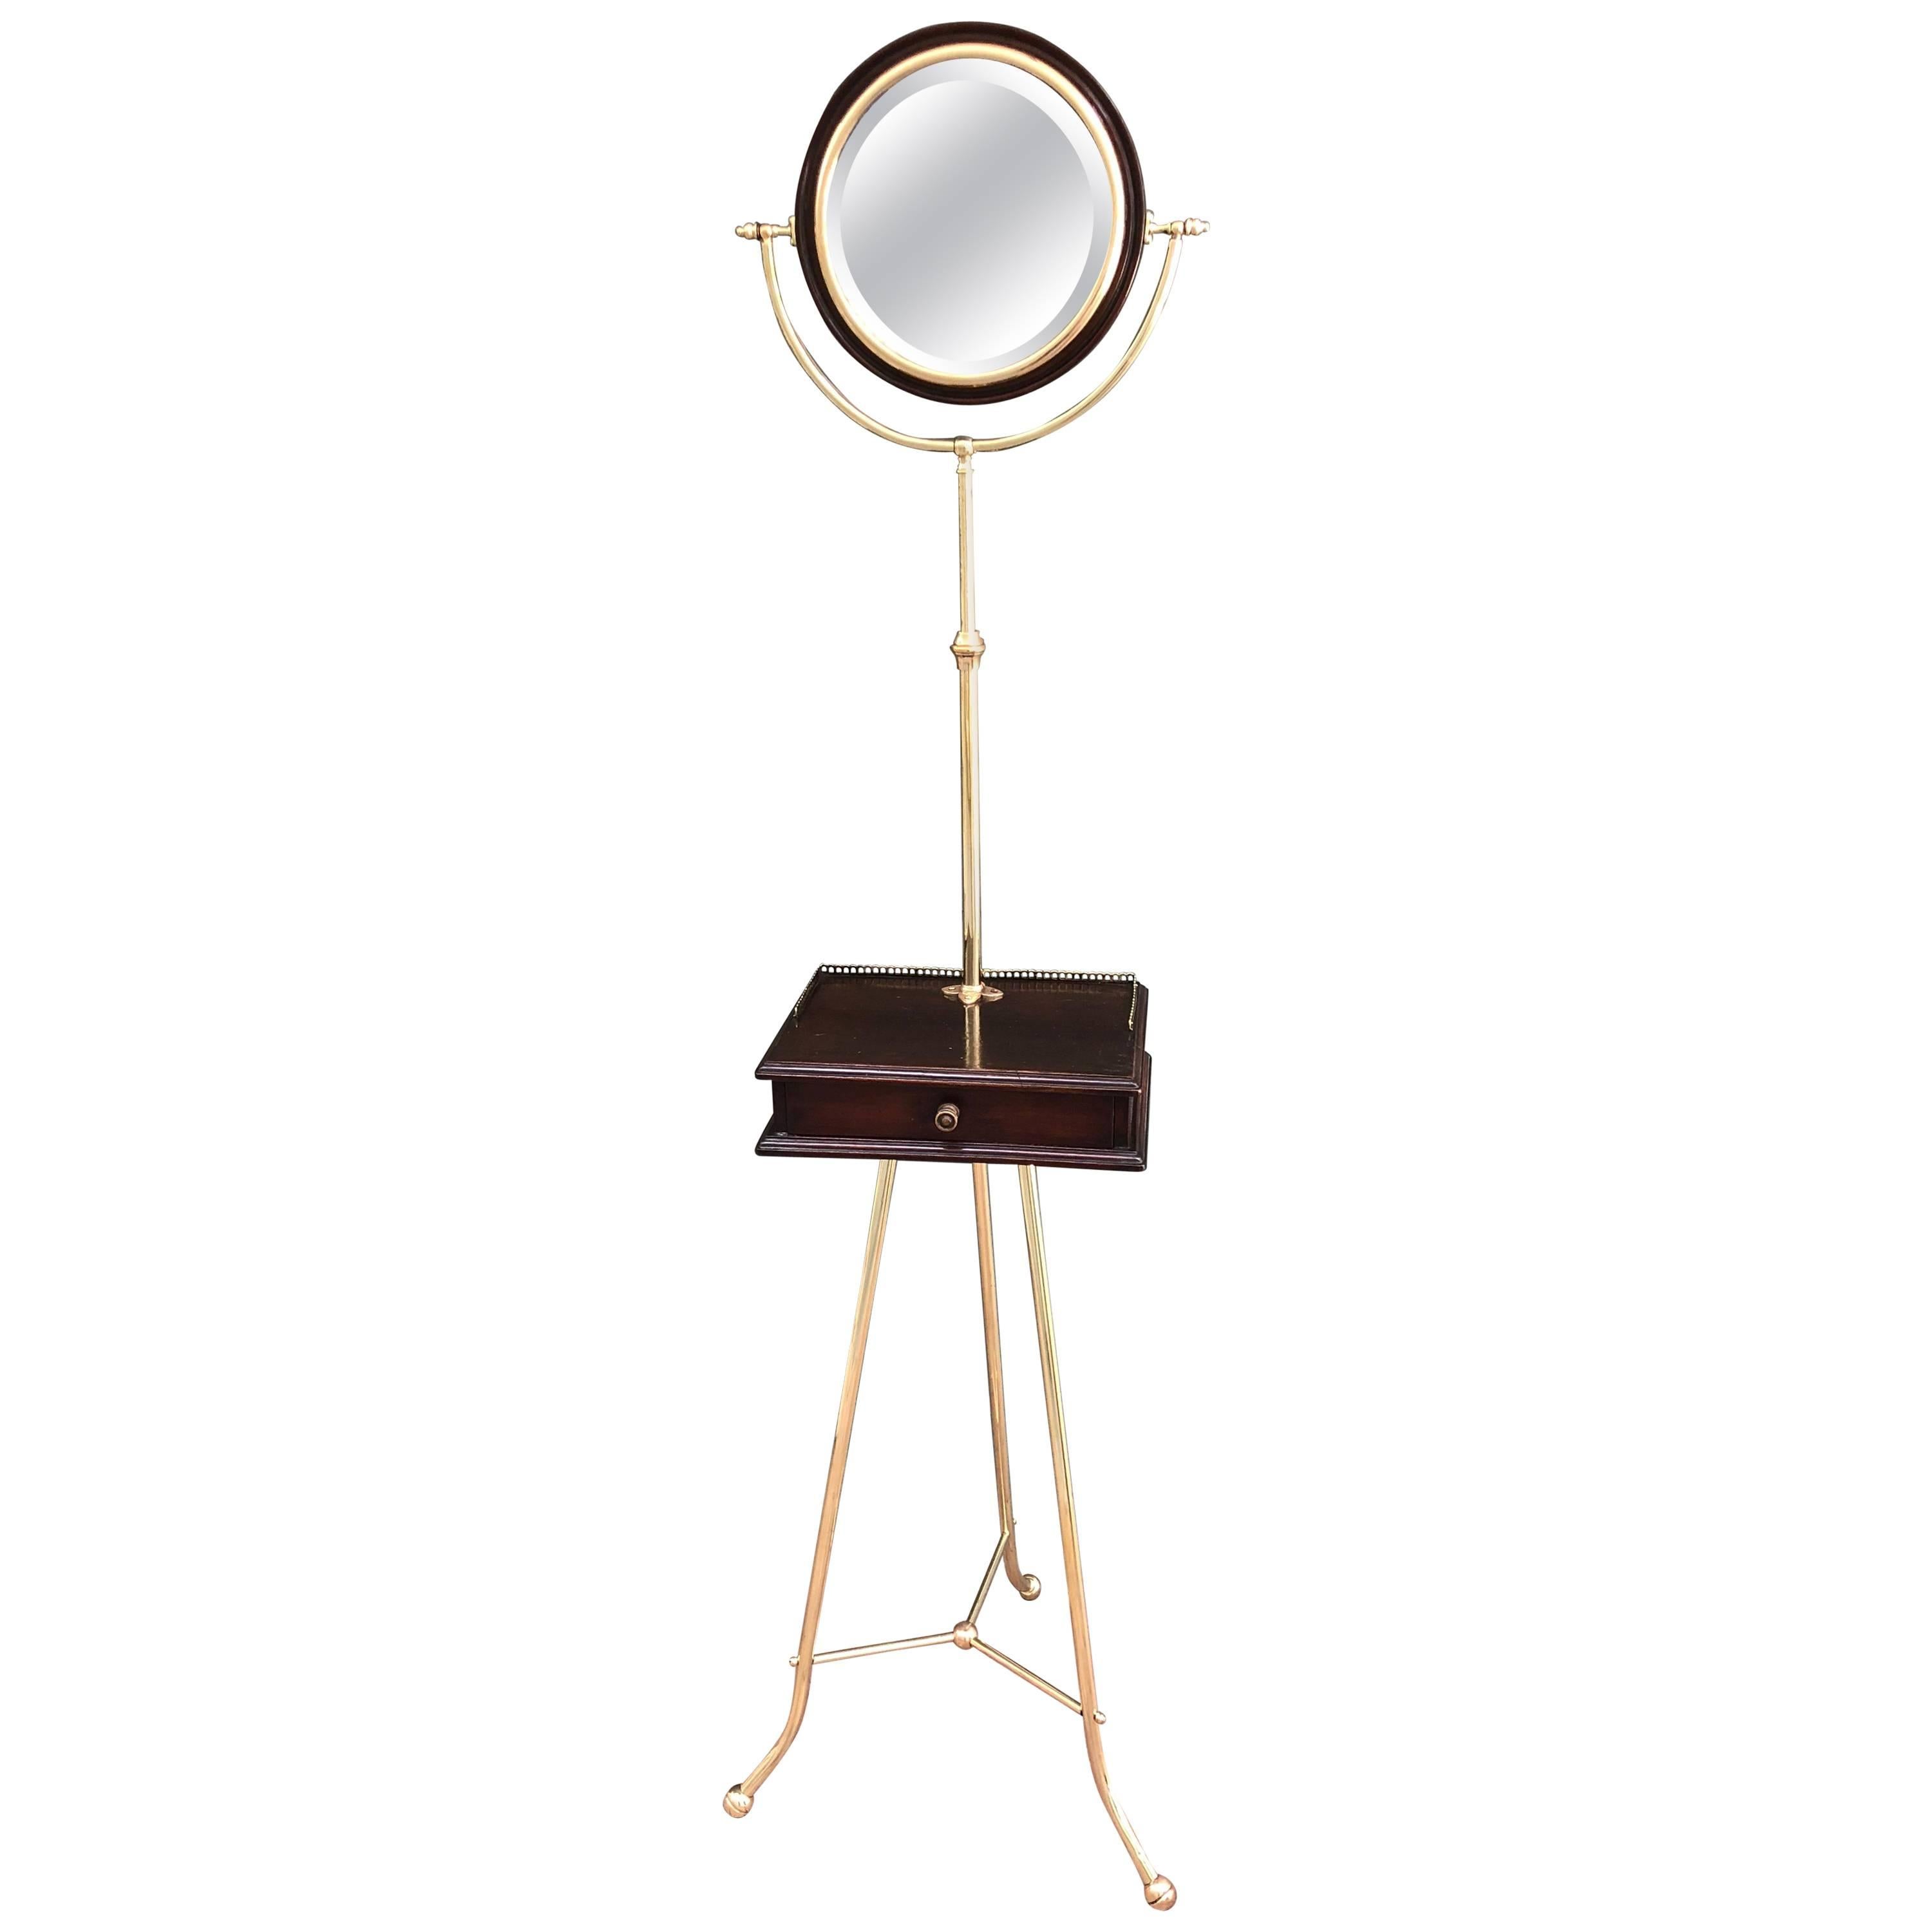 19th Century Gentleman's English Campaign Shaving Stand with Mirror